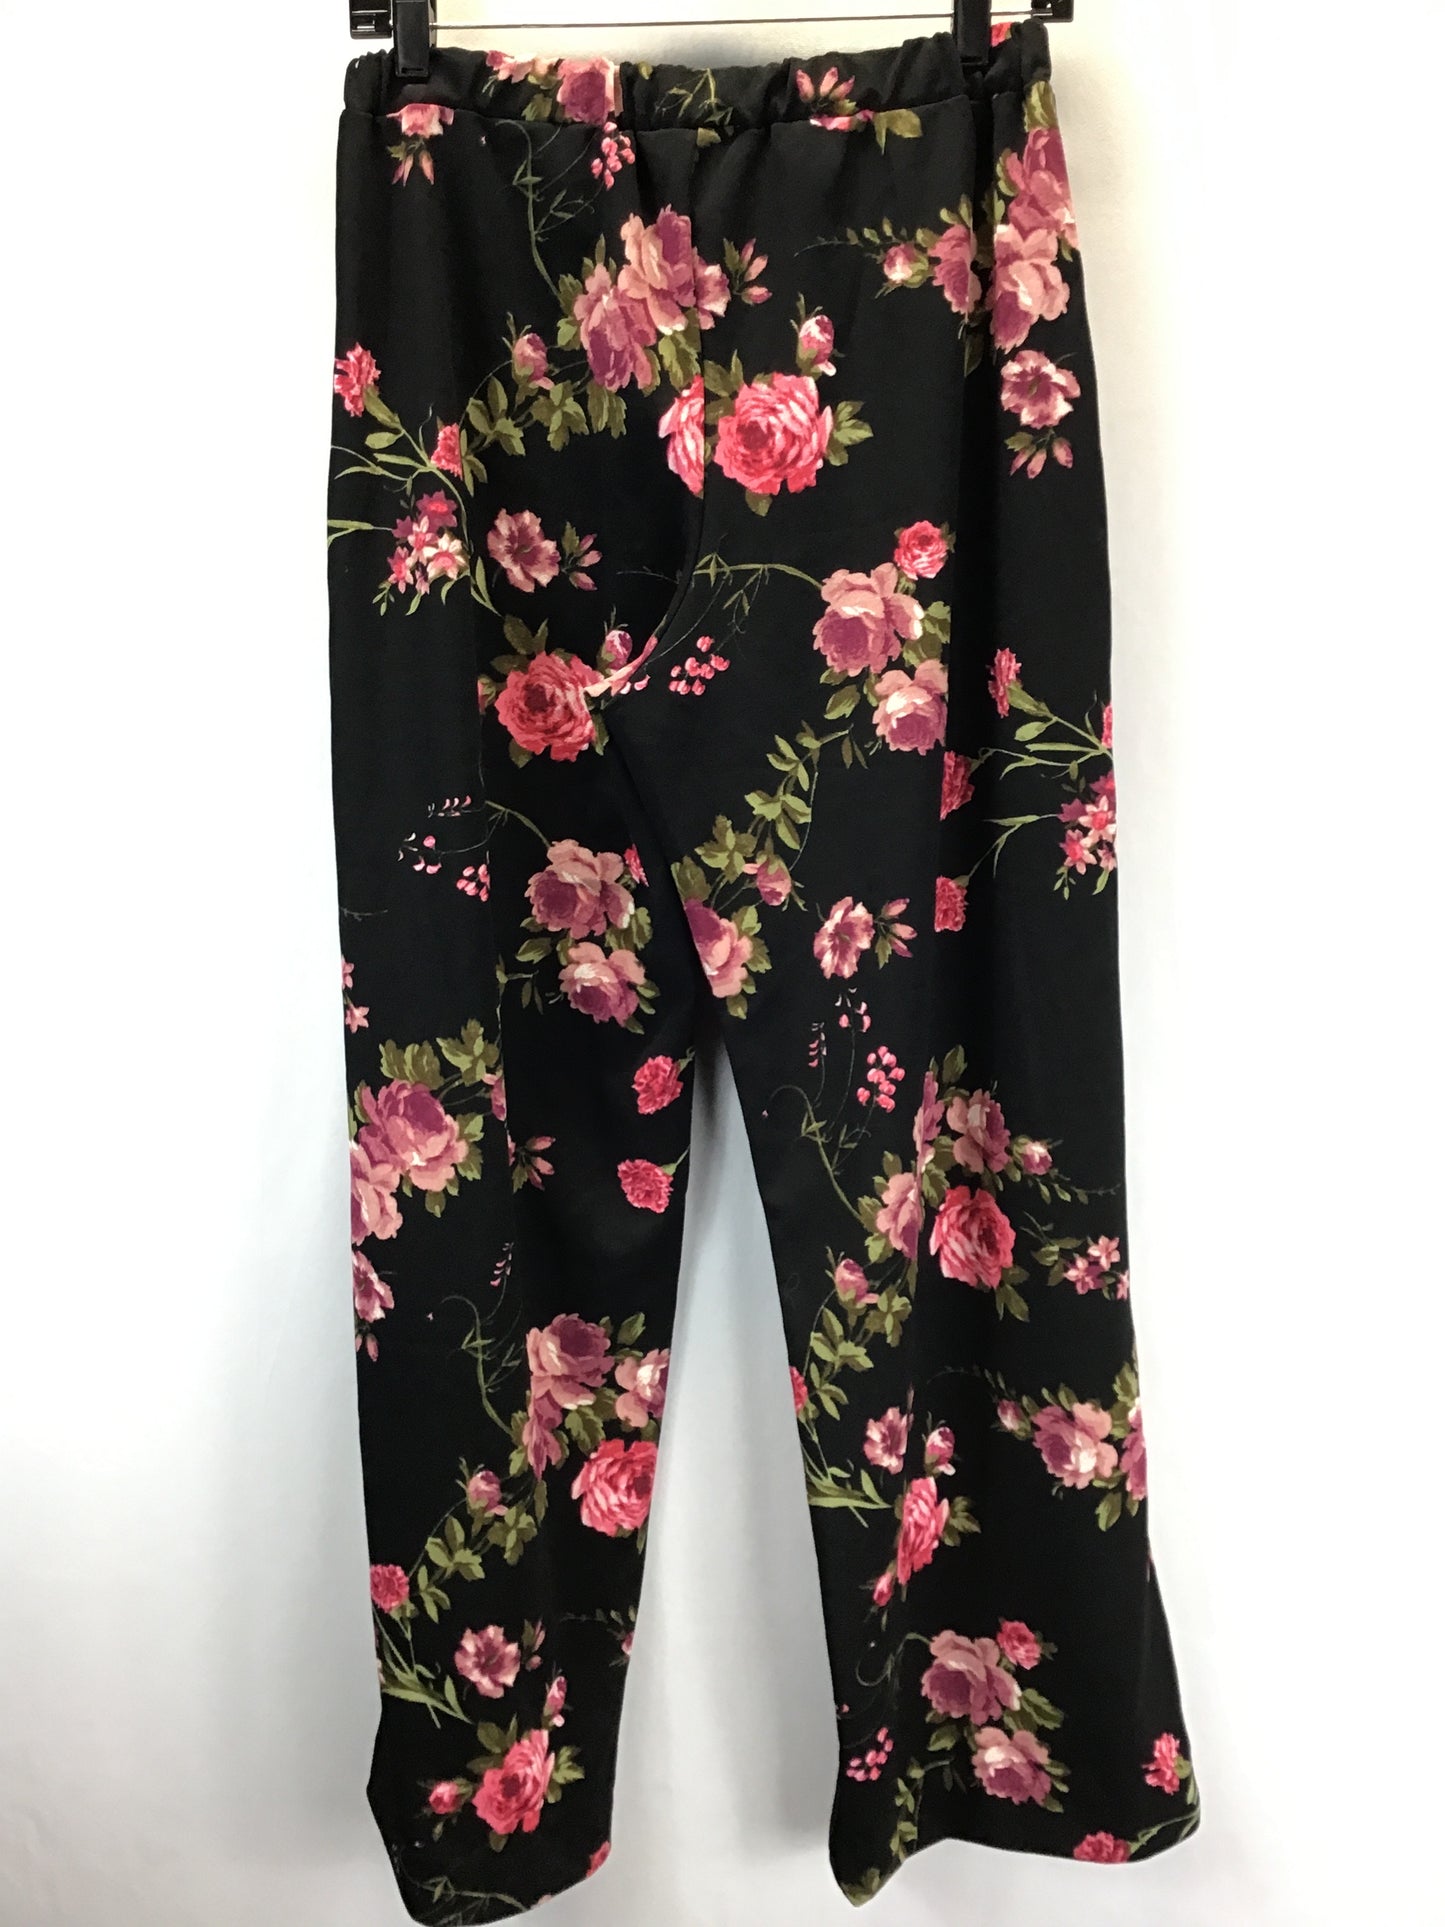 Pants Ankle By Clothes Mentor  Size: M